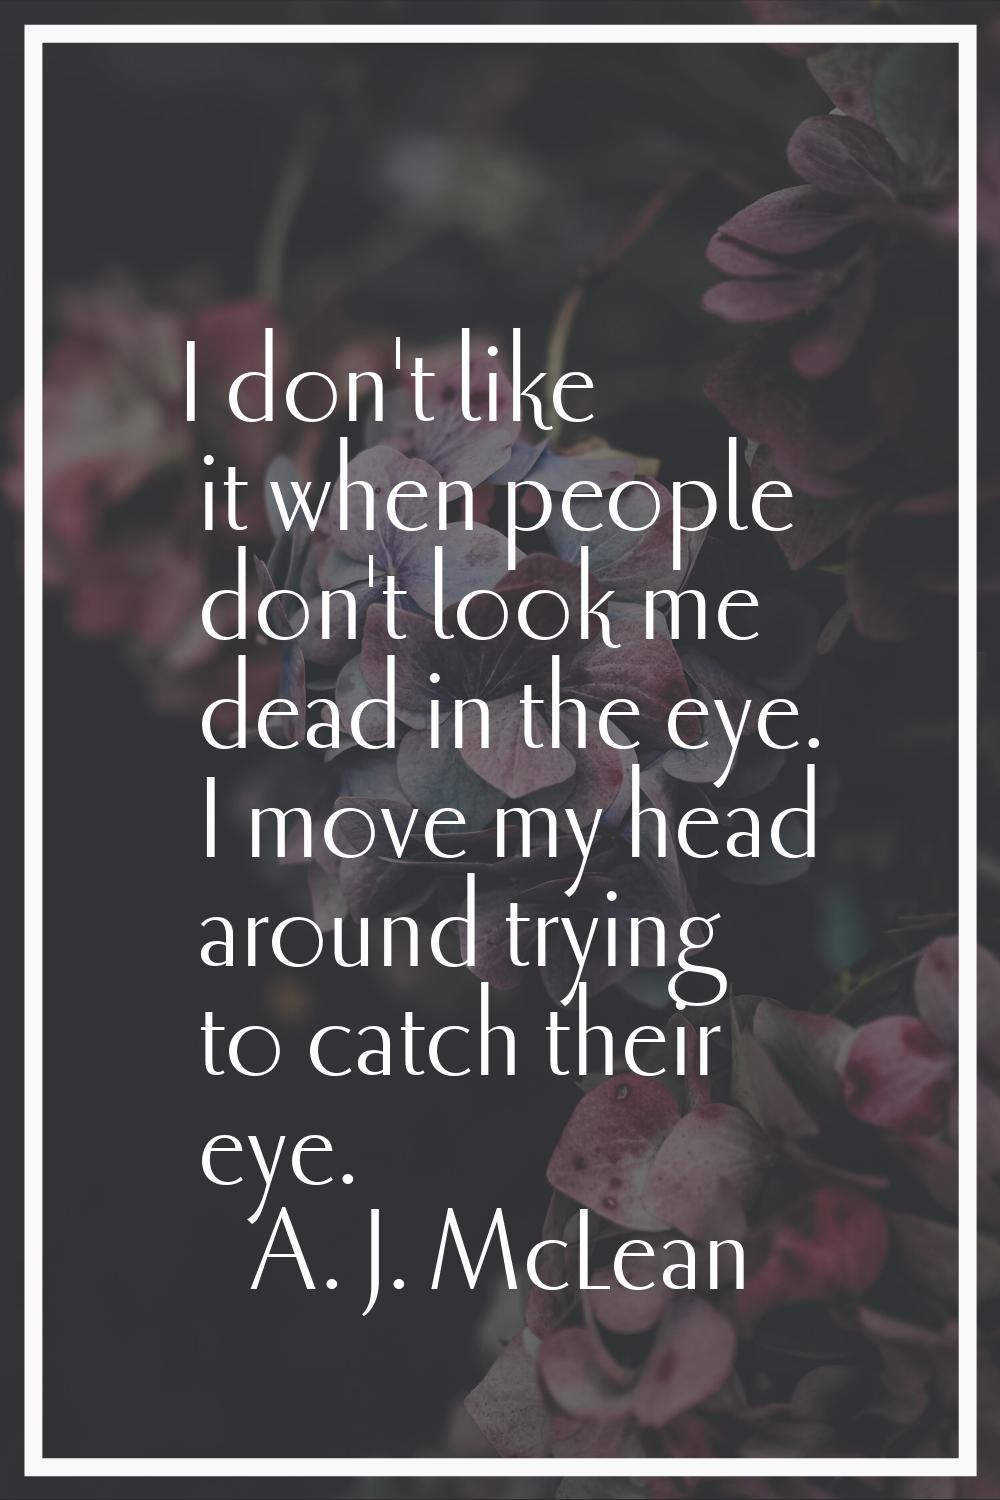 I don't like it when people don't look me dead in the eye. I move my head around trying to catch th